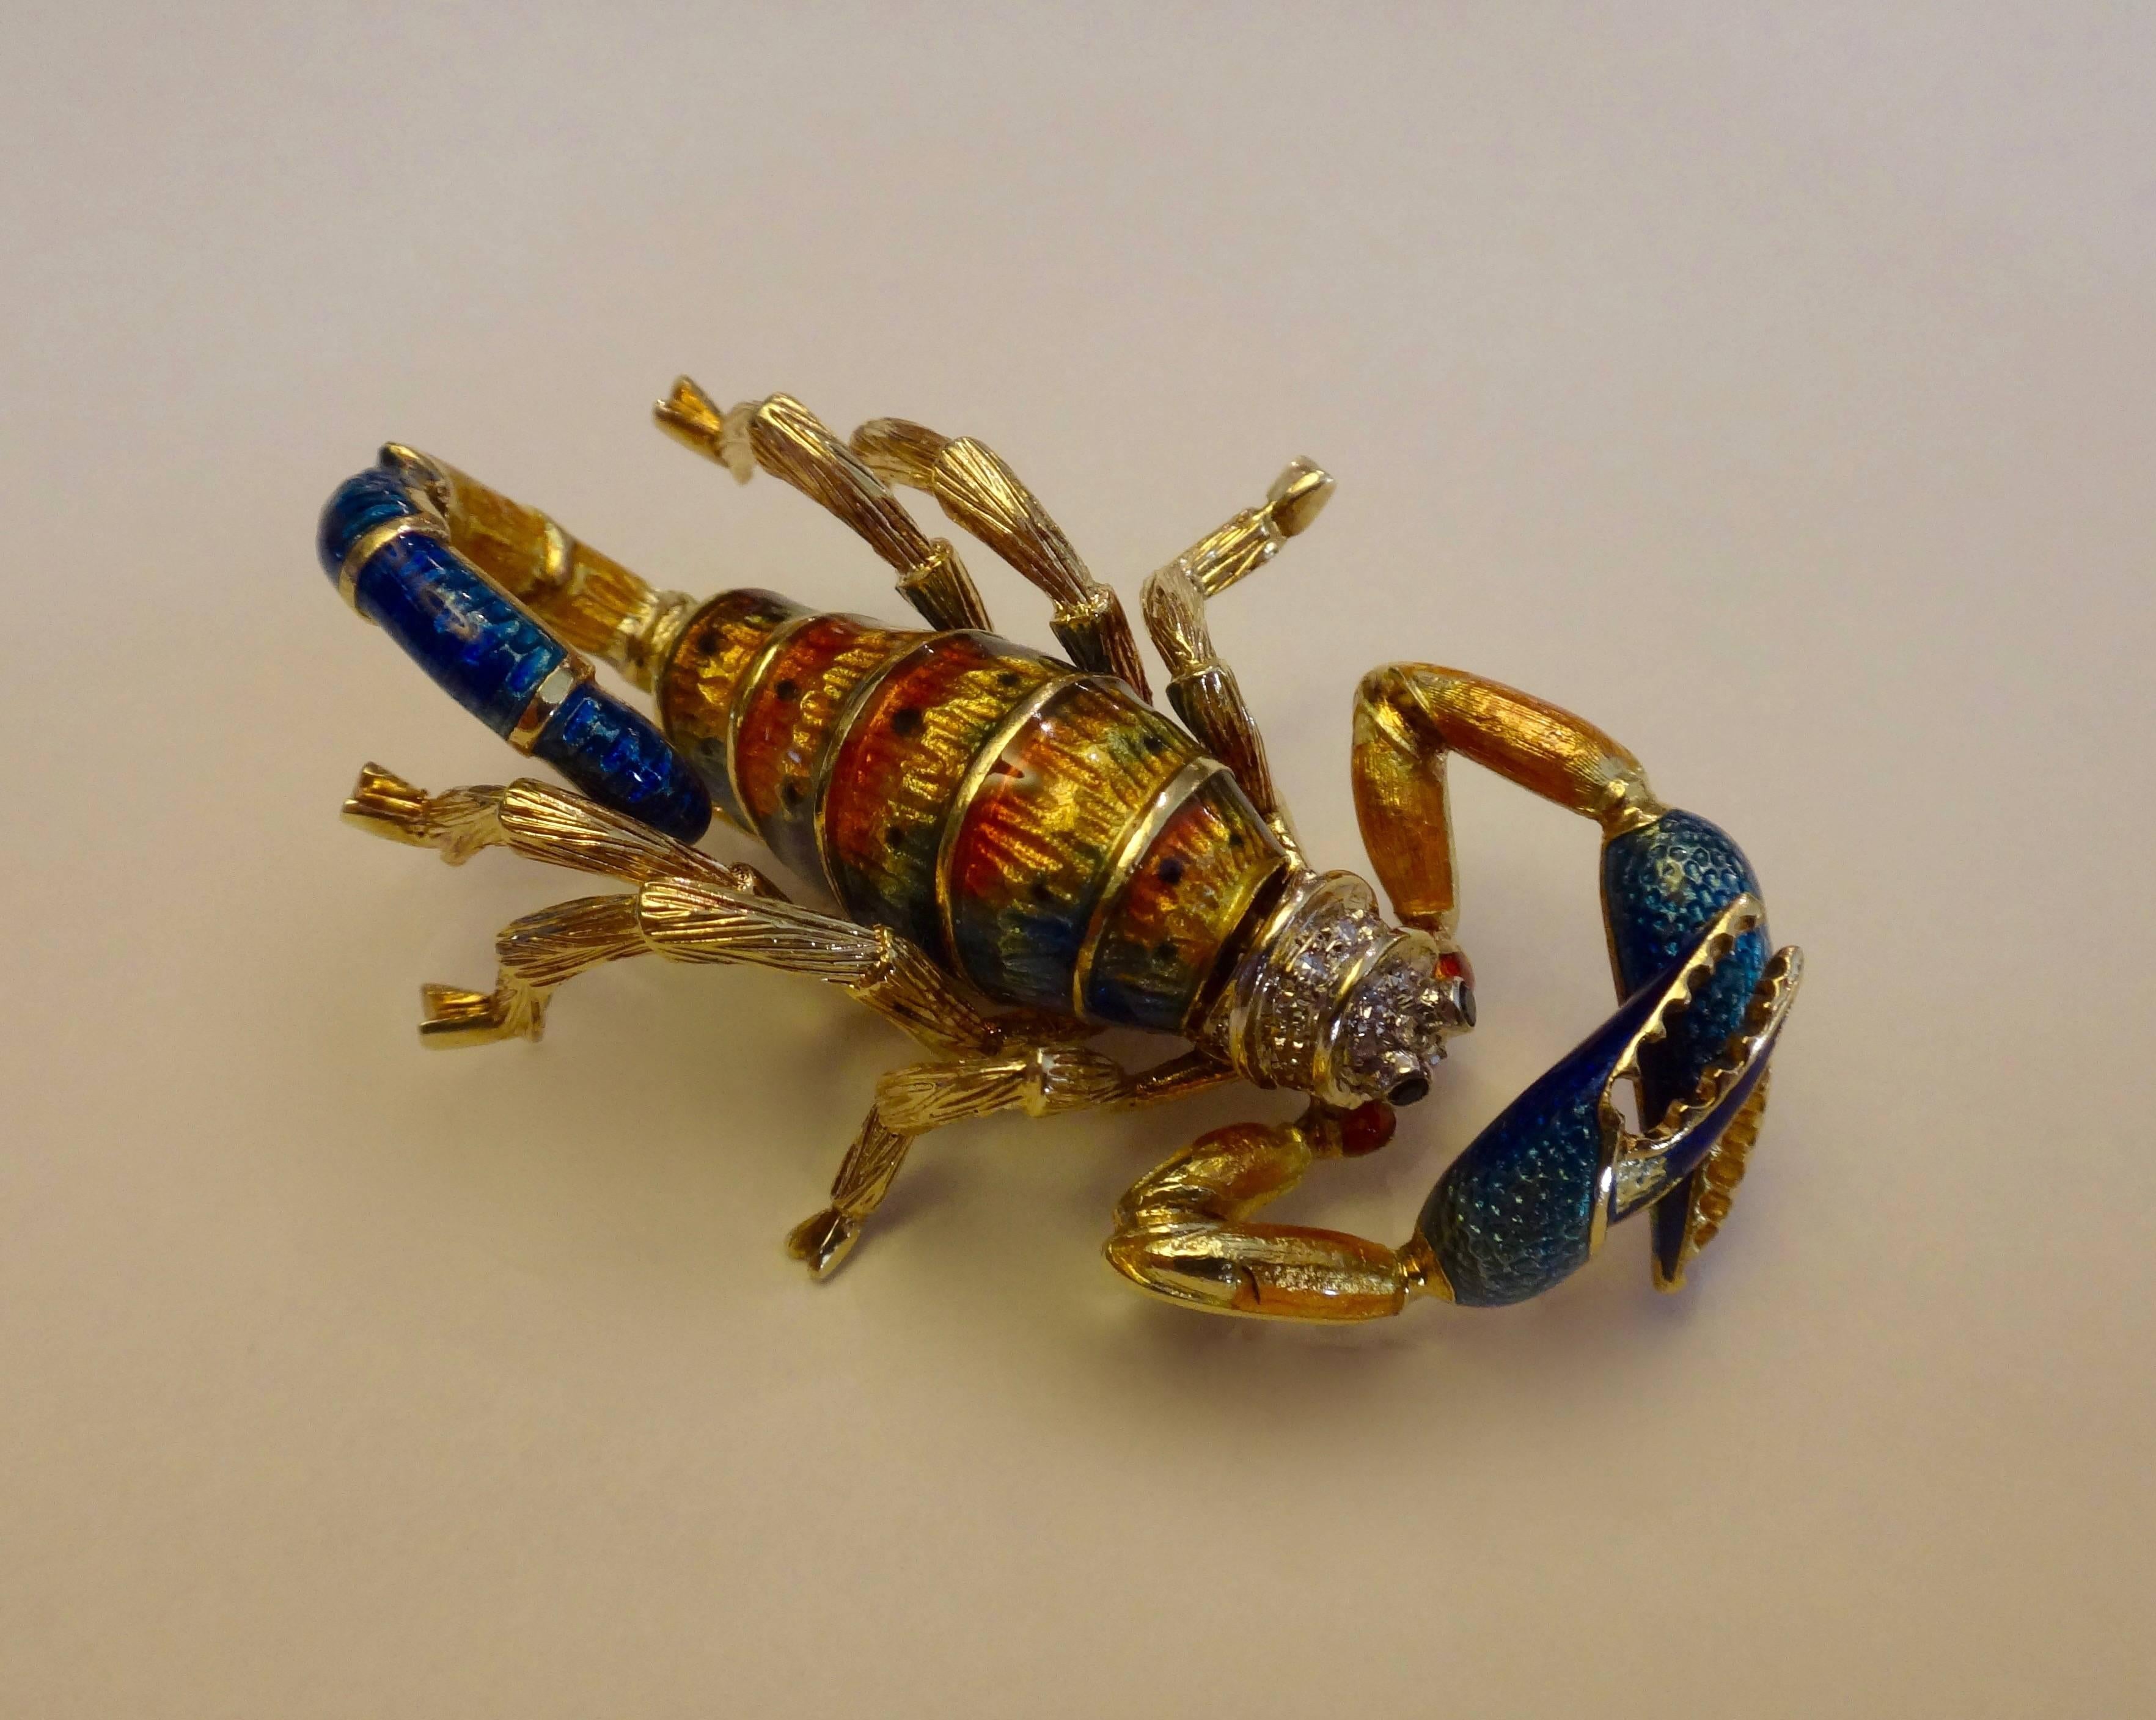 This whimsical scorpion brooch created in Italy of 18k yellow gold with multicolored enamel, pave diamonds and emerald eyes is full of character and charm. He would be wonderful on a jacket, coat or even a hat.  